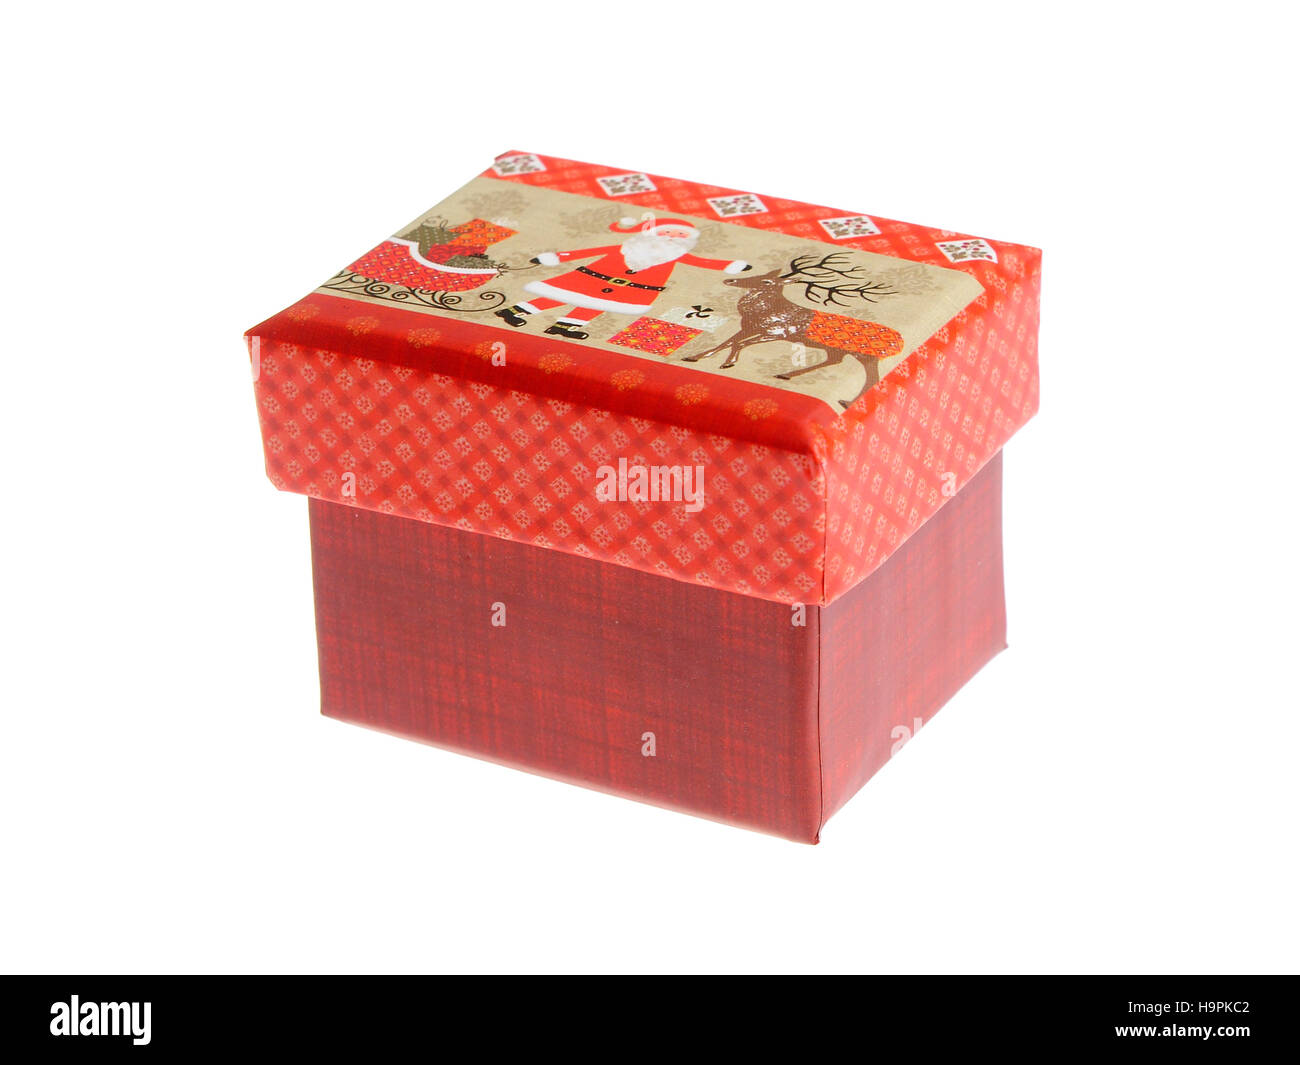 Christmas box for gifts, with Santa Claus decoration Stock Photo